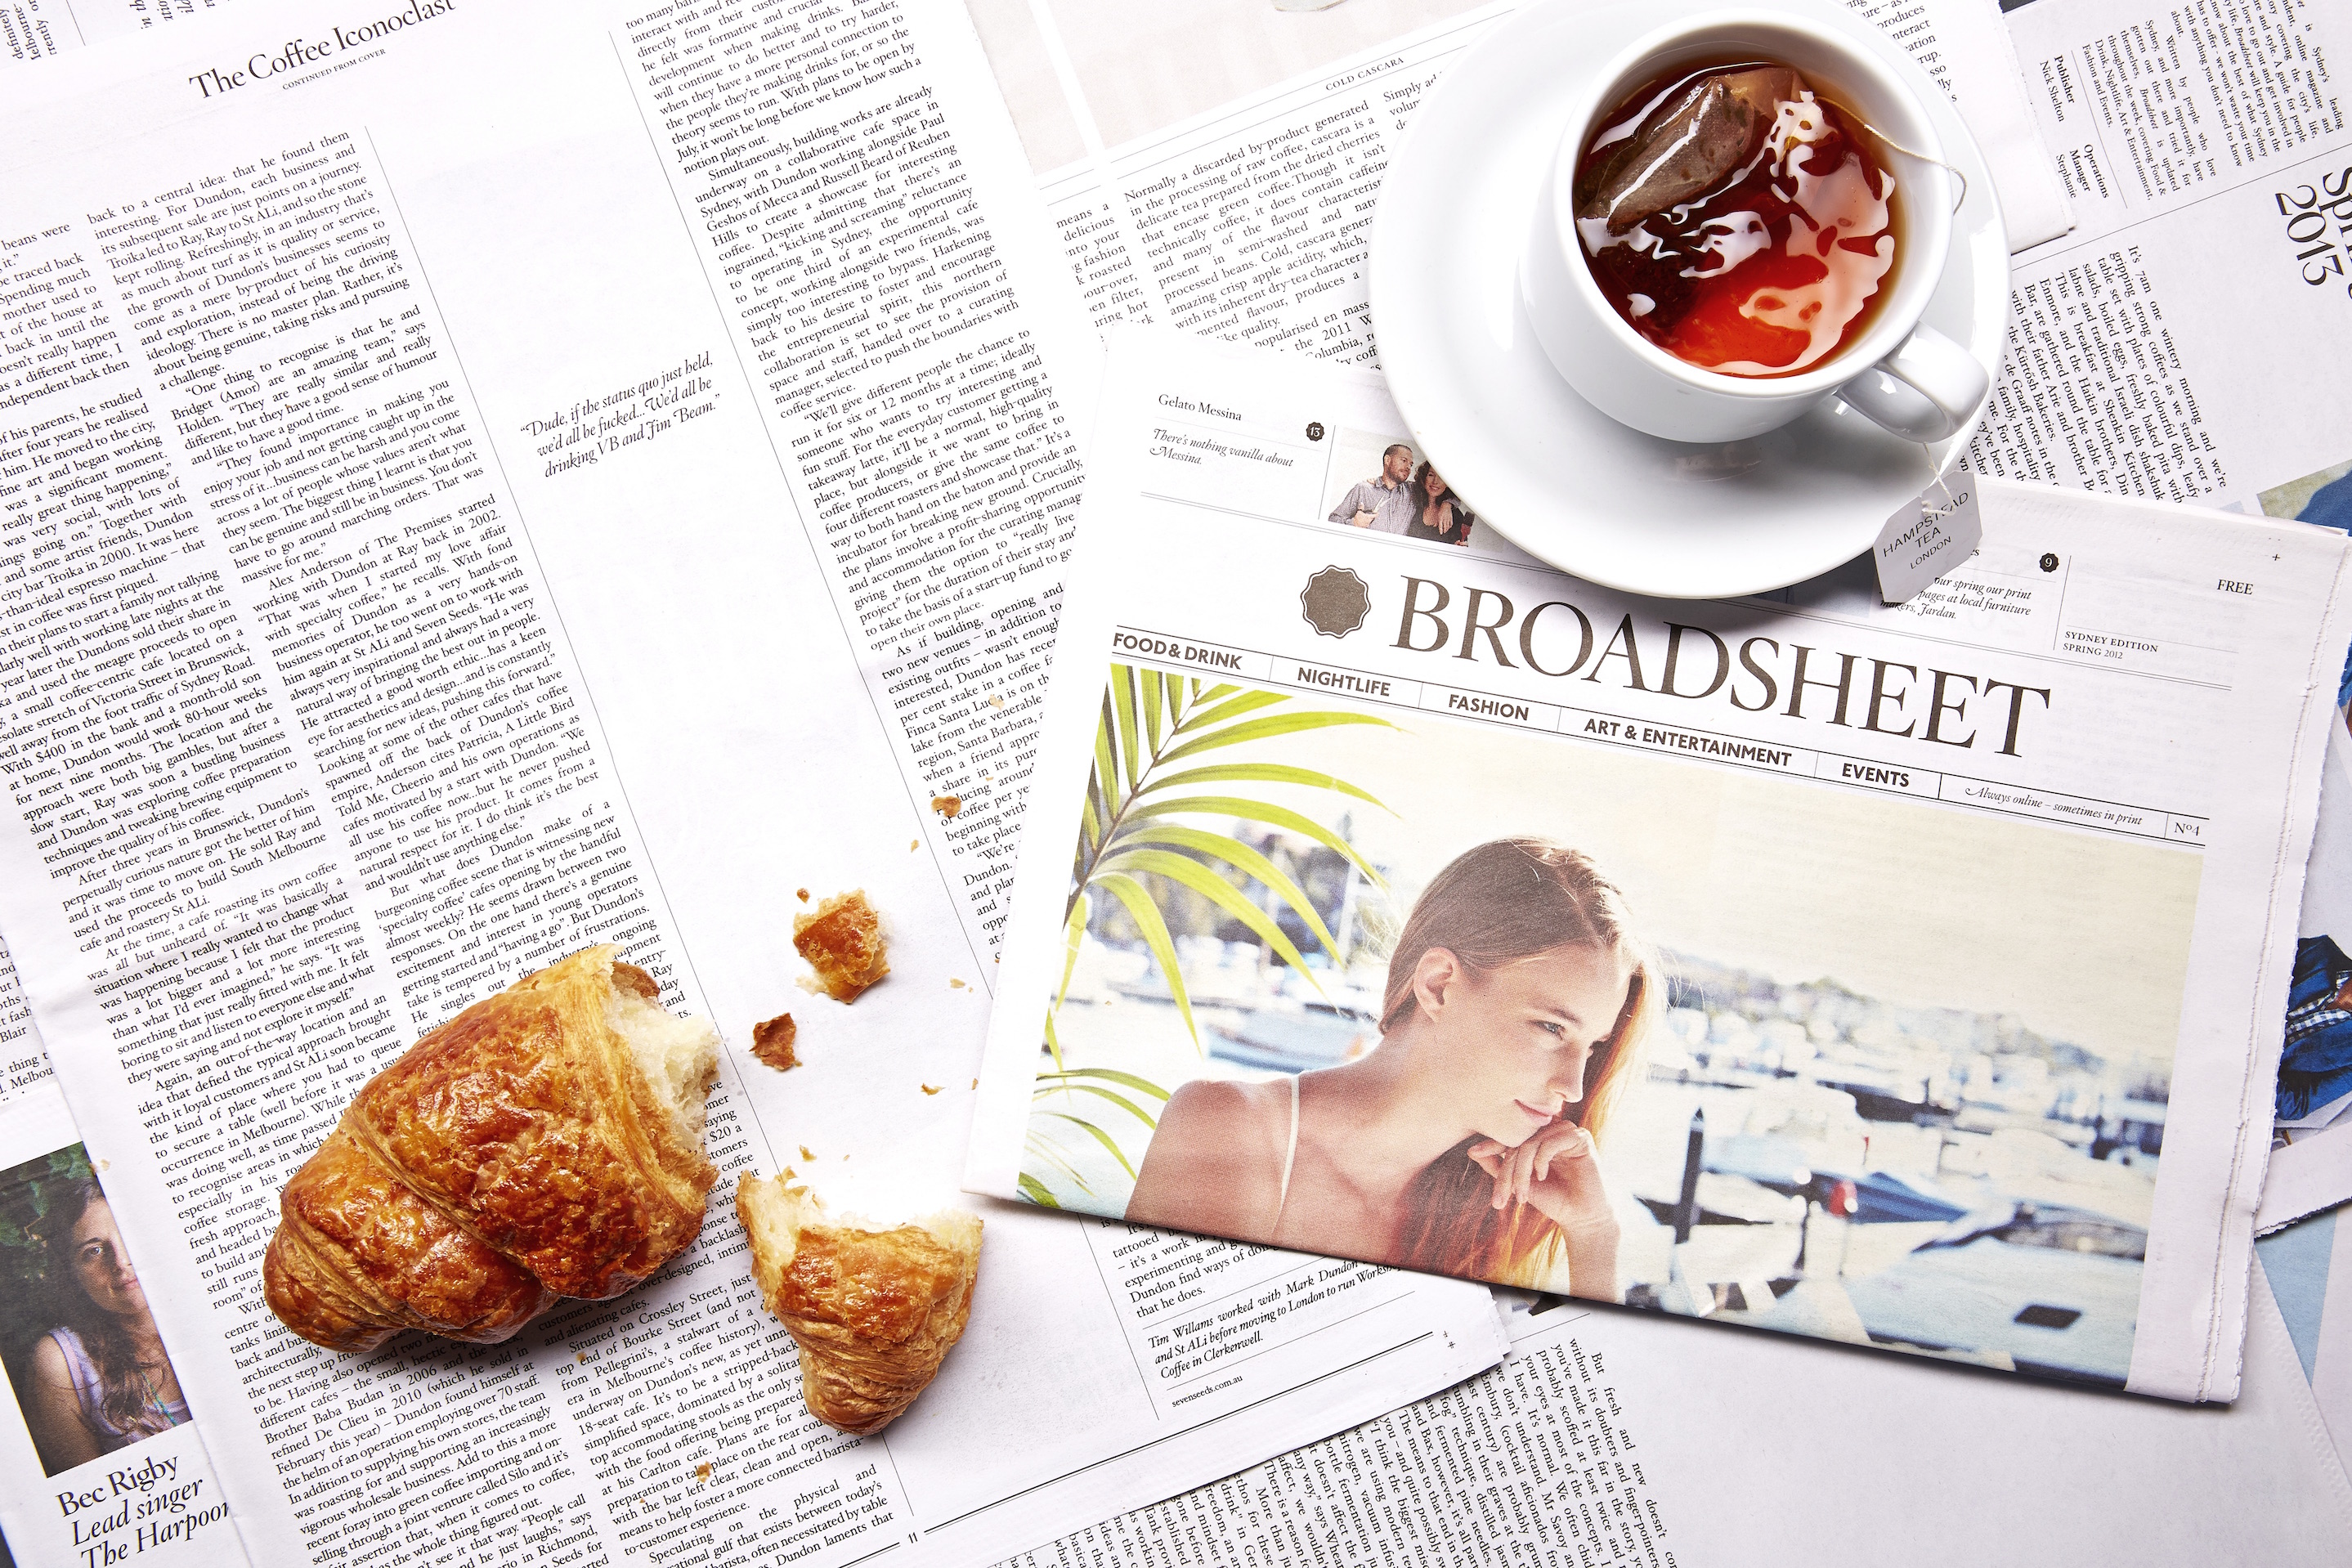 October 2012 – Broadsheet Sydney publishes its fourth print issue | Photography by Daniel Herrmann-Zoll
